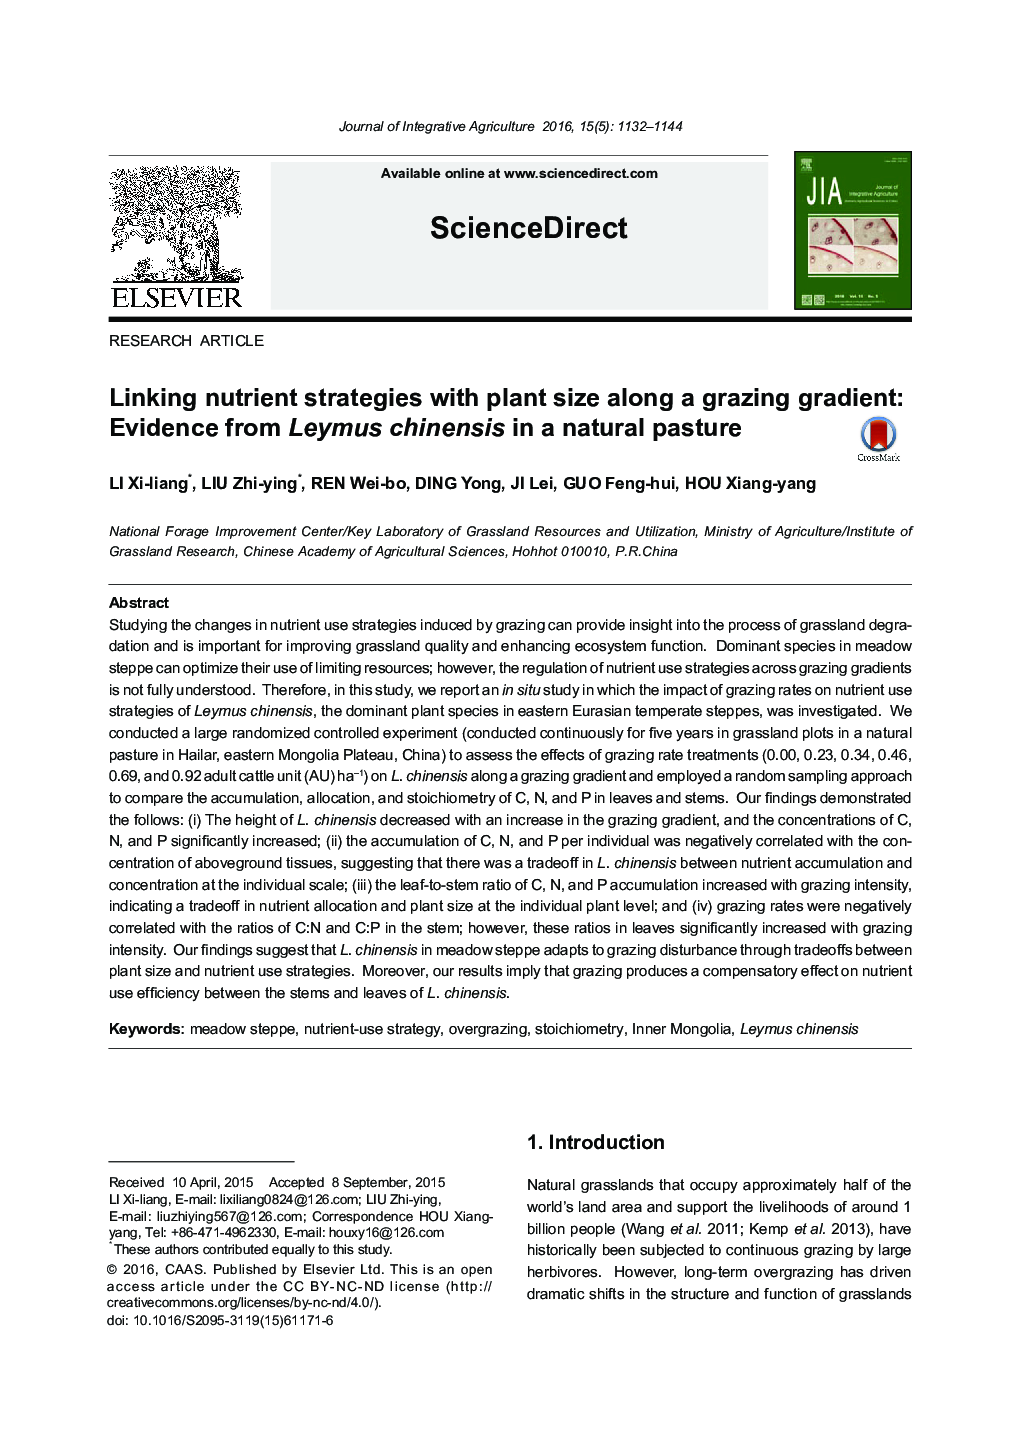 Linking nutrient strategies with plant size along a grazing gradient: Evidence from Leymus chinensis in a natural pasture